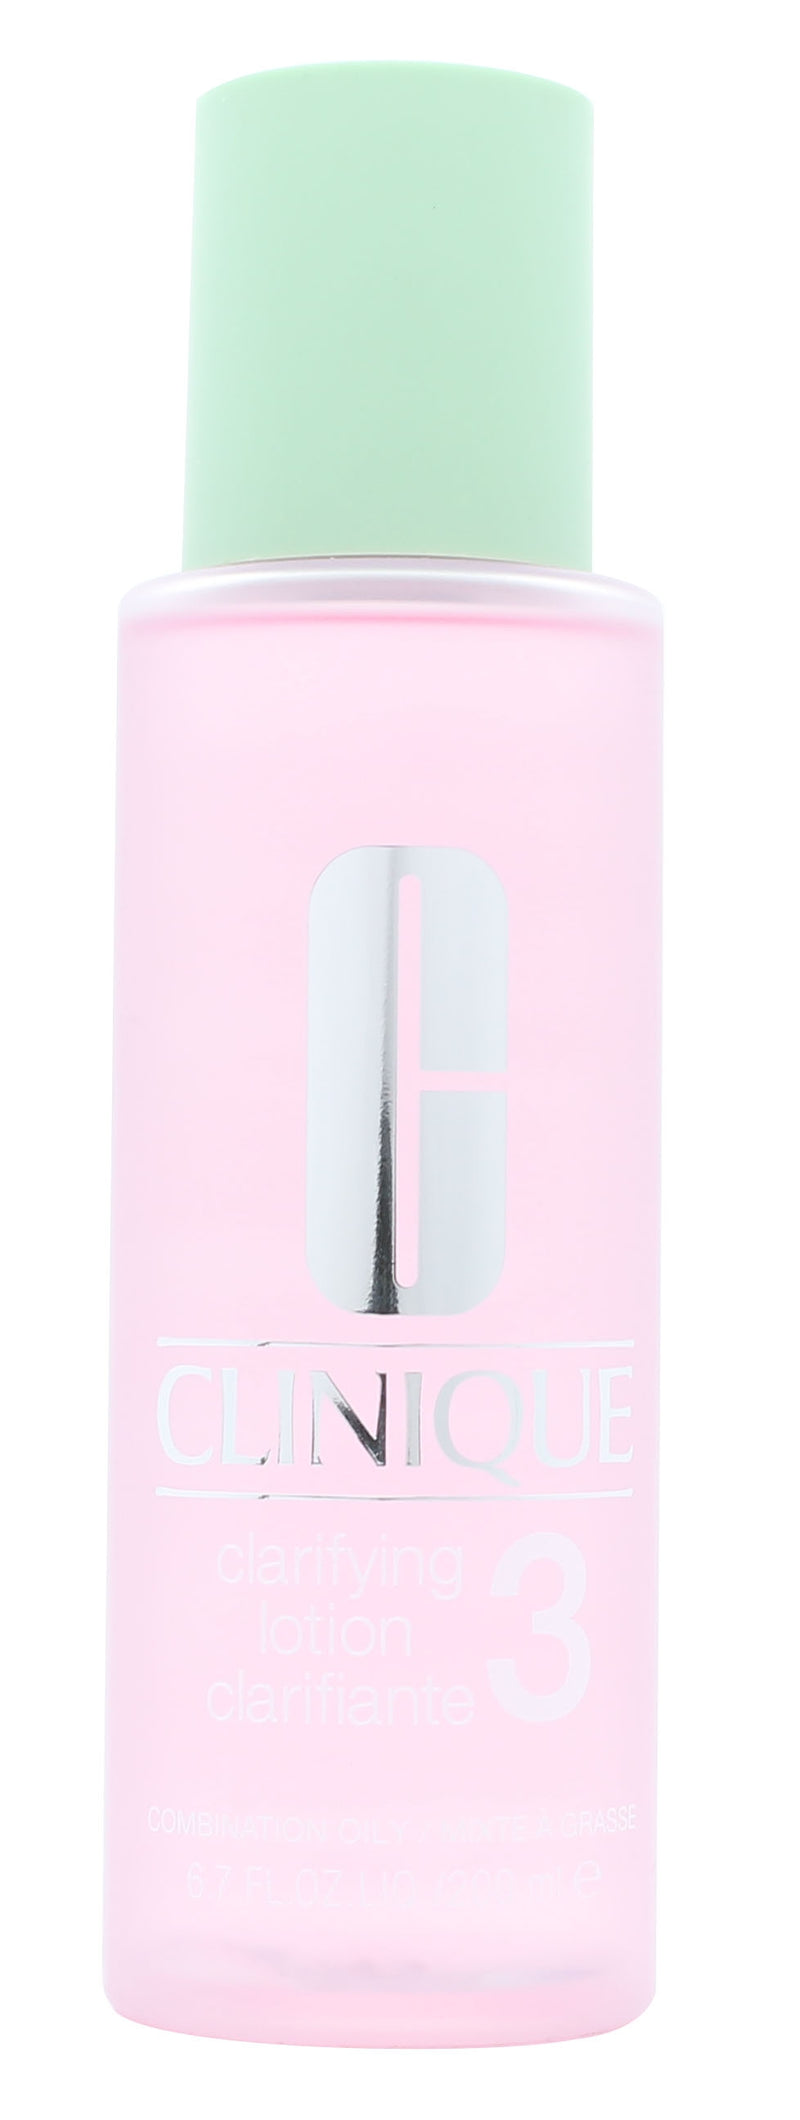 Clinique Cleansing Range Clarifying Lotion 200ml 3 - Oily